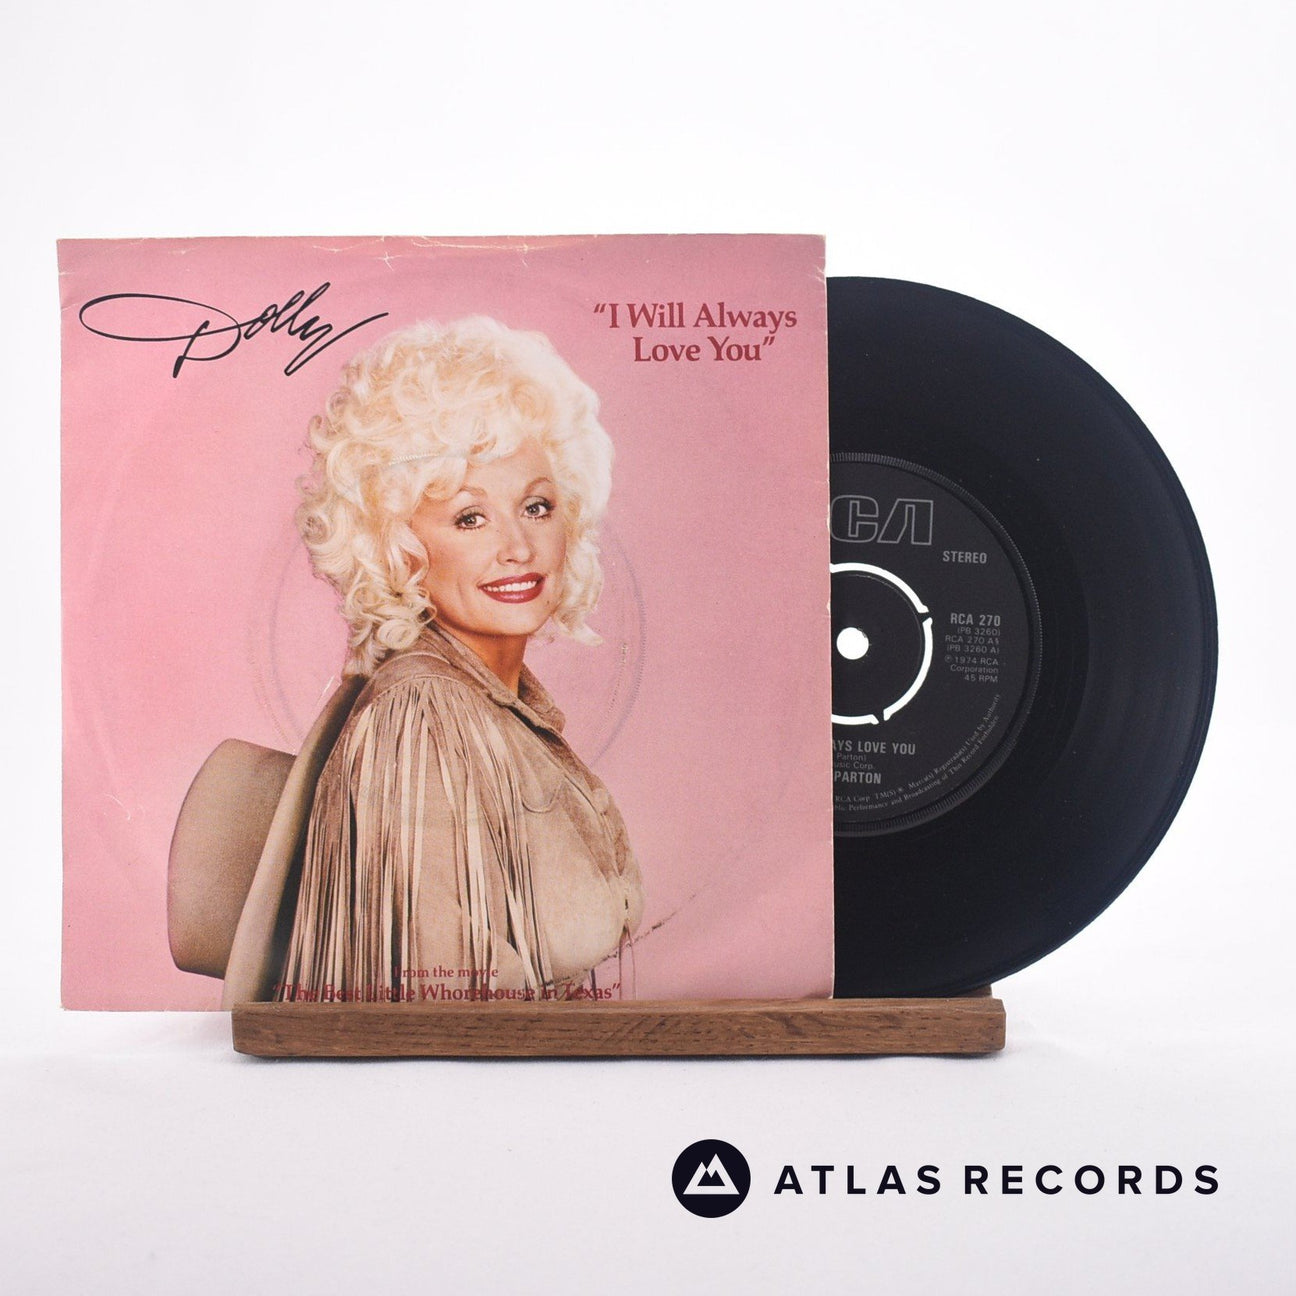 Dolly Parton I Will Always Love You 7" Vinyl Record - Front Cover & Record